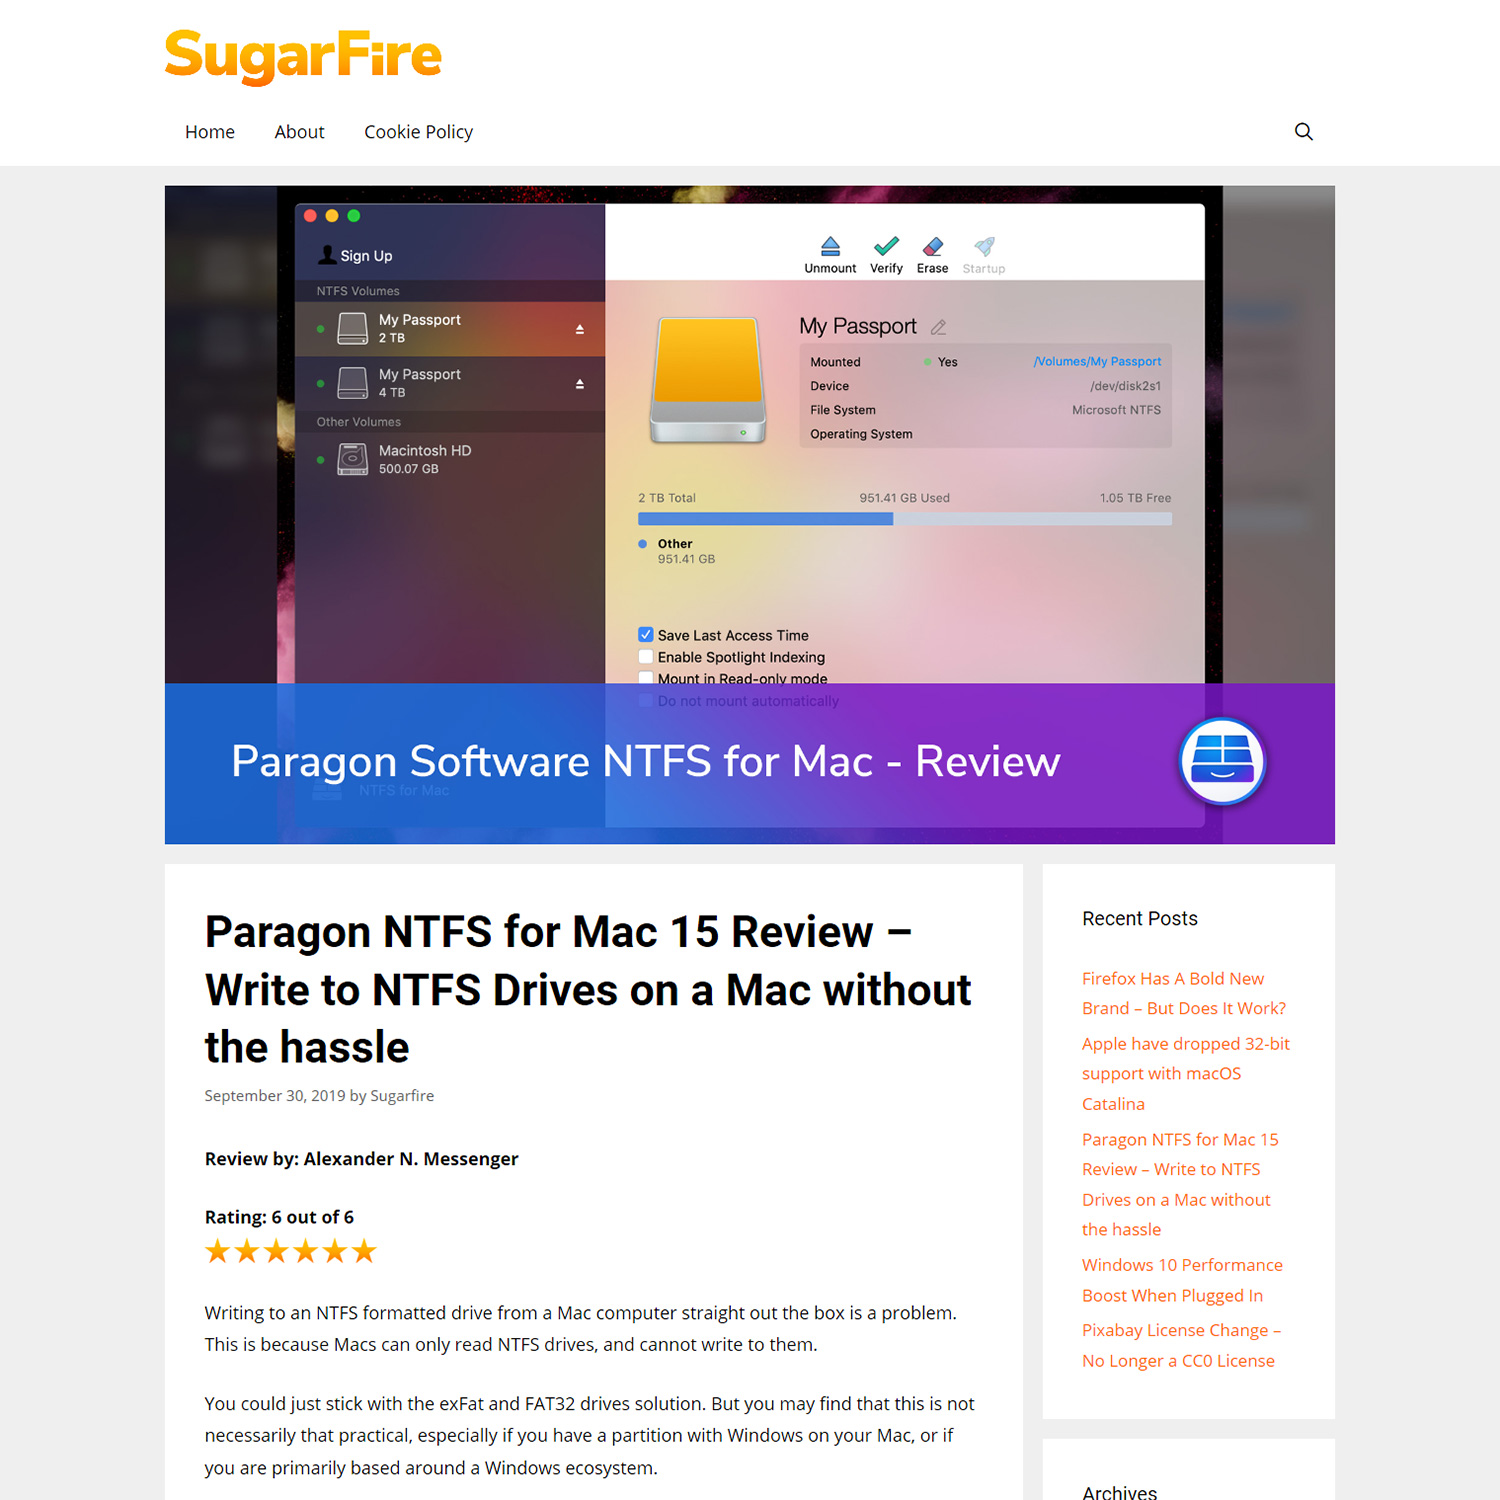 Image of Paragon NTFS for Mac 15 review on the SugarFire.net website